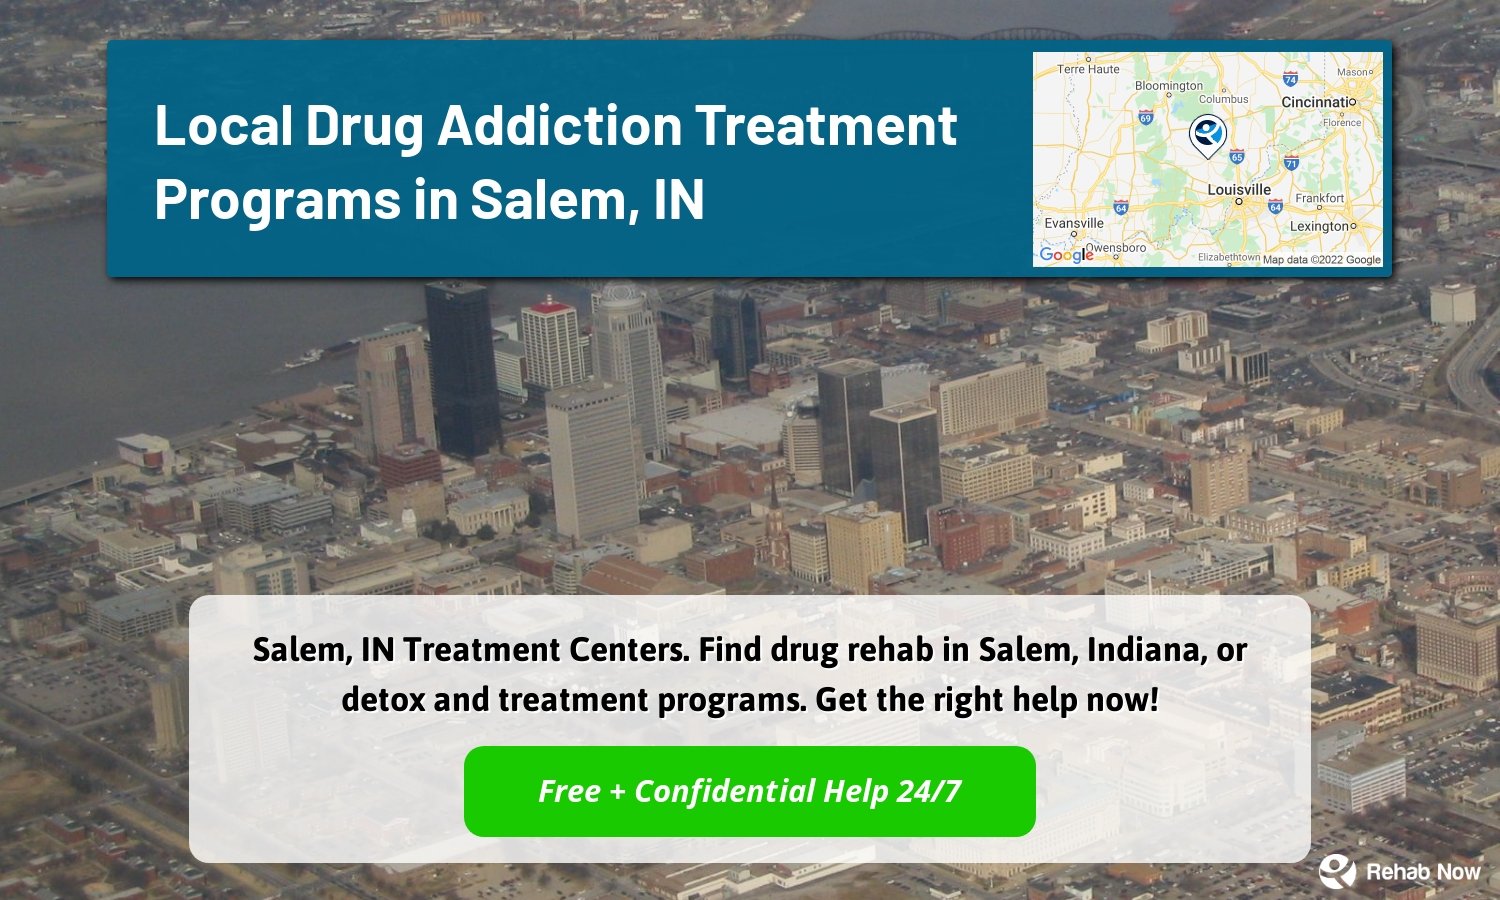 Salem, IN Treatment Centers. Find drug rehab in Salem, Indiana, or detox and treatment programs. Get the right help now!